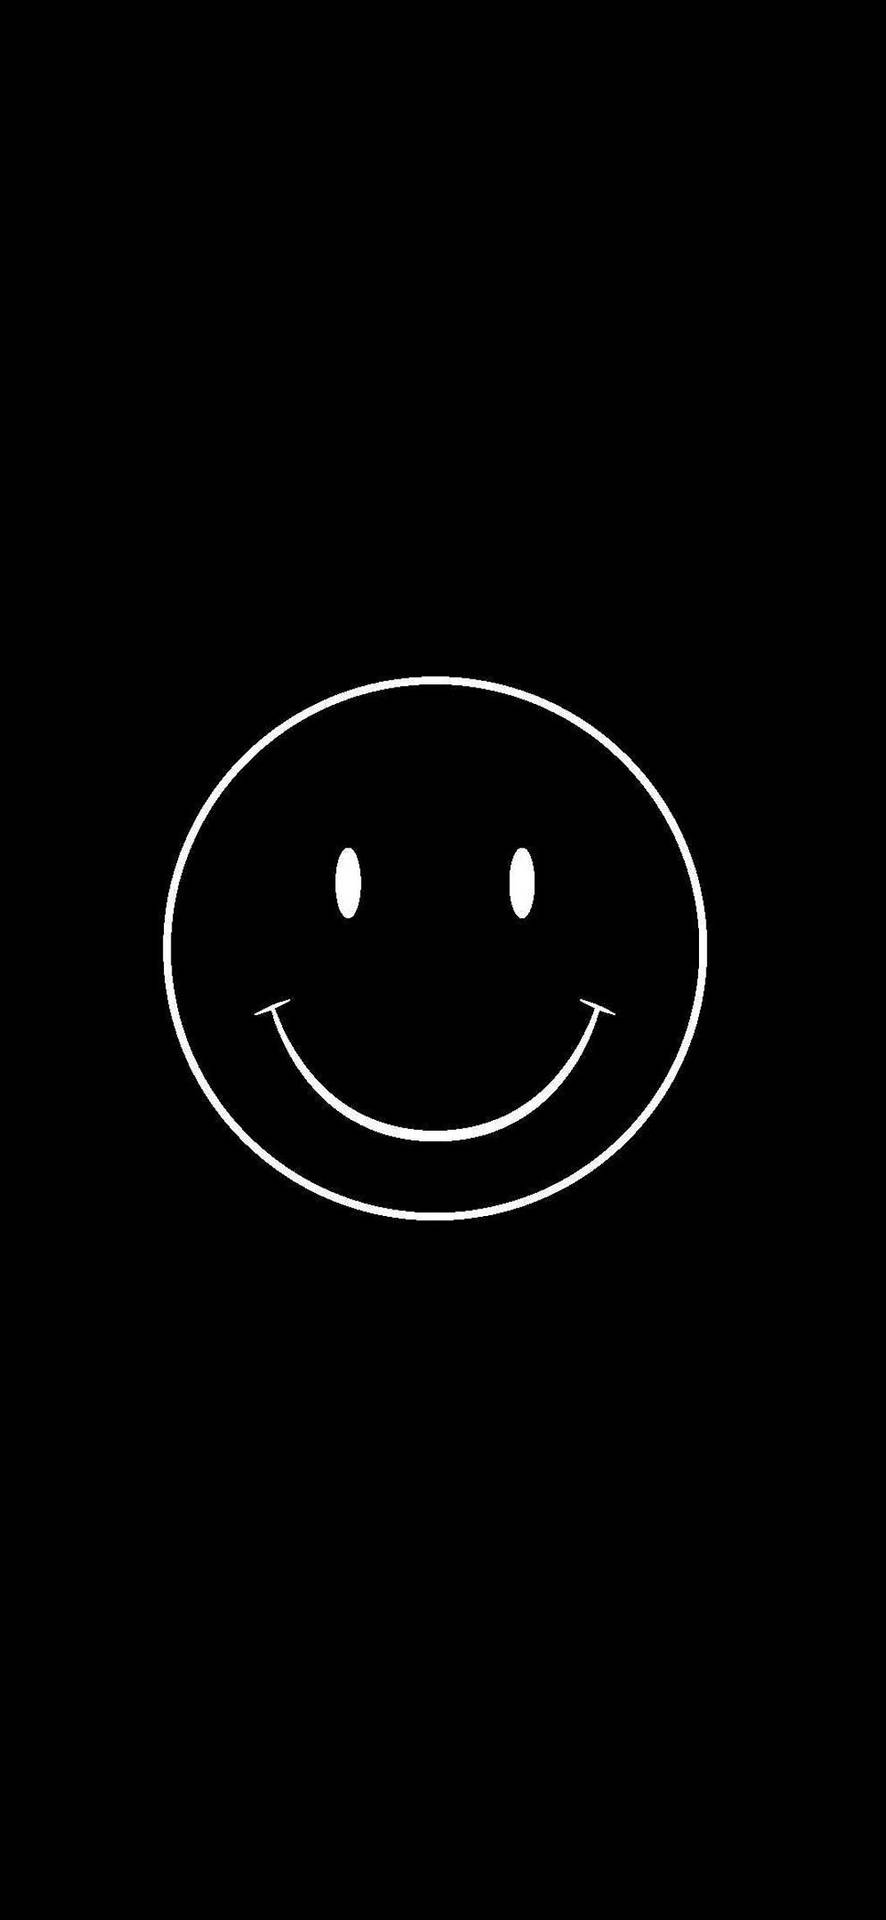 Minimalist Smiley Face In Black Background